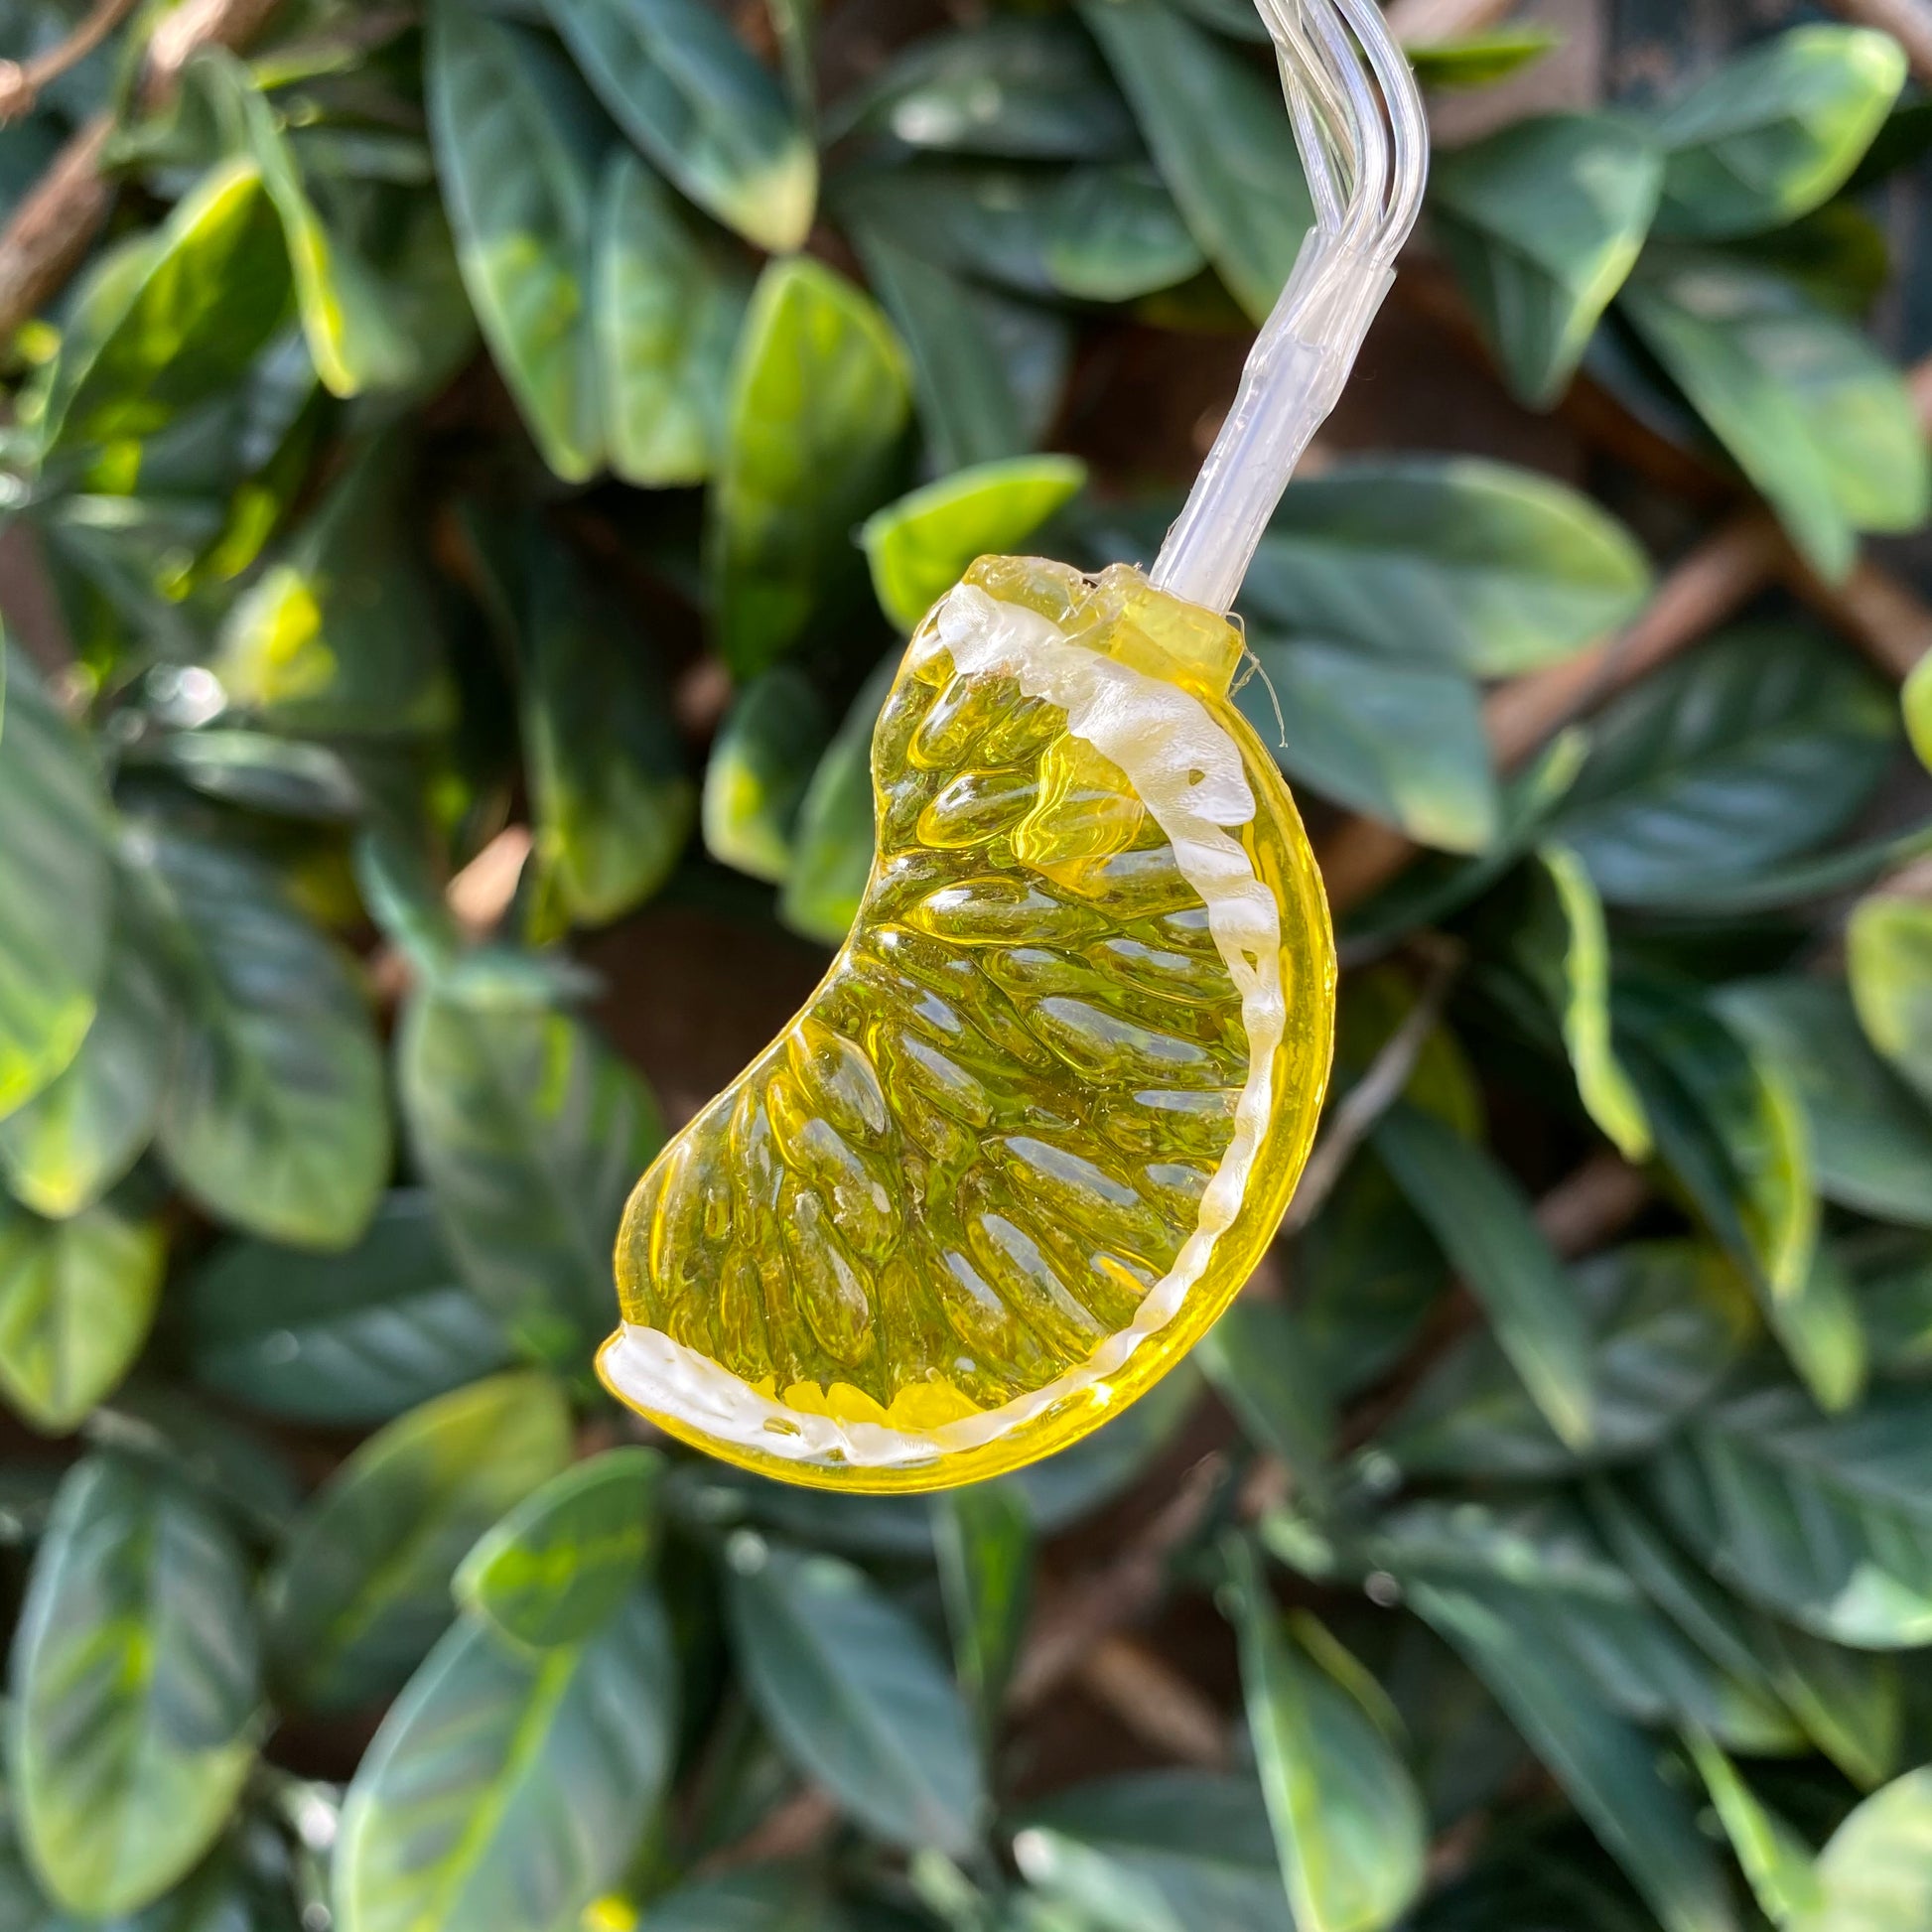 image of 1 lemon from the light set to show it in detail, with a green leaf trellis background